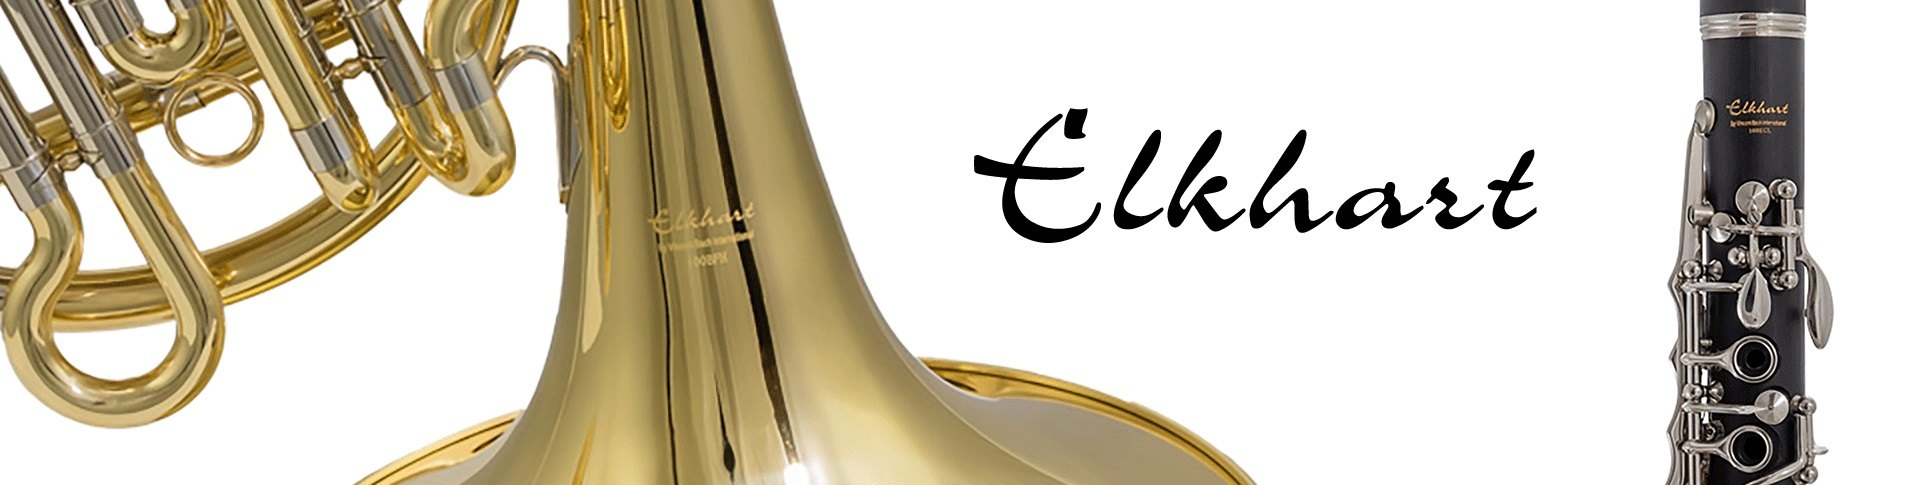 Elkhart Brand Instruments and Logo